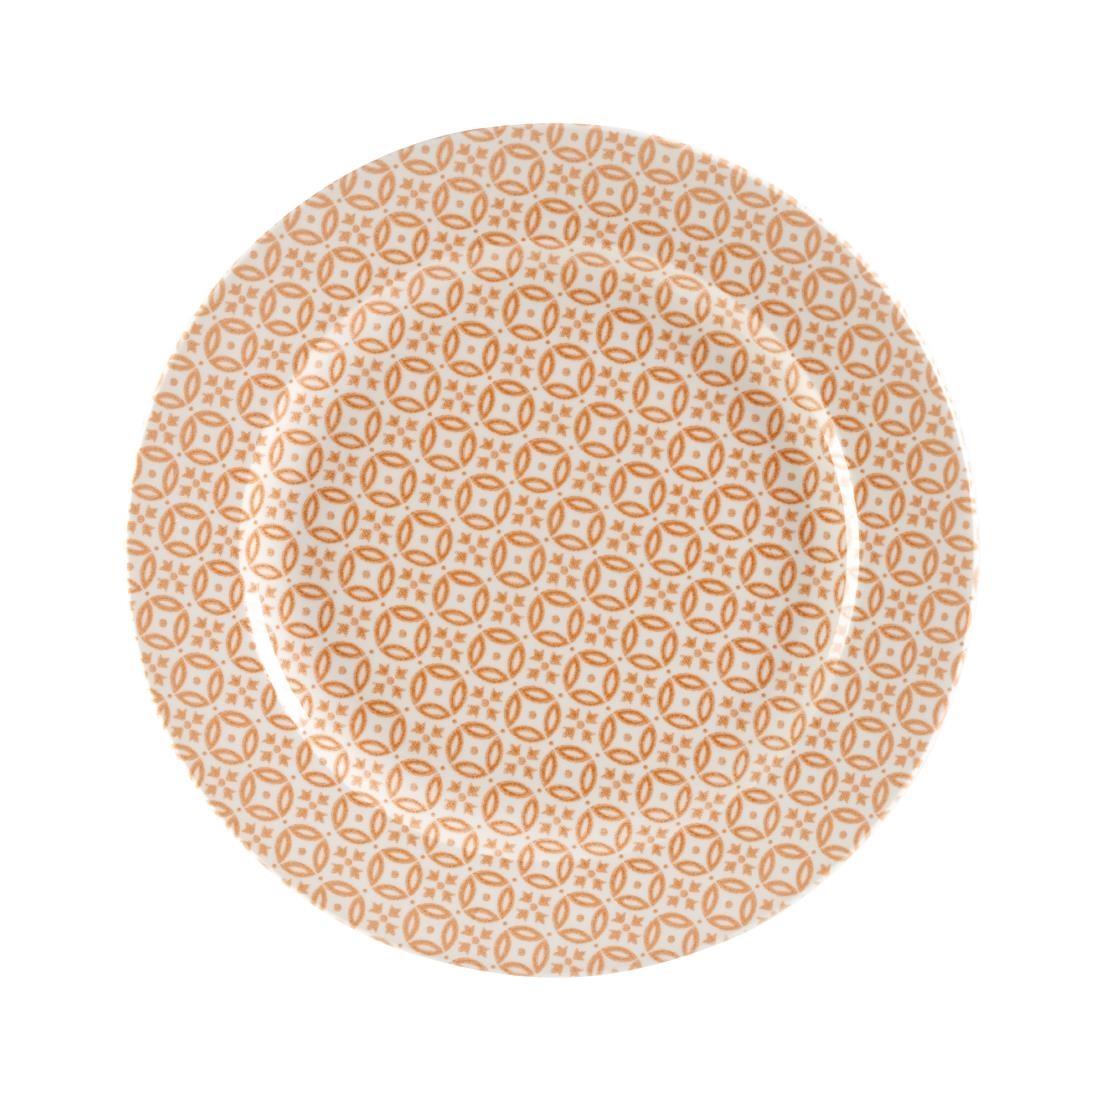 Churchill Moresque Prints Plate Orange 276mm (Pack of 12) - GM681  - 1